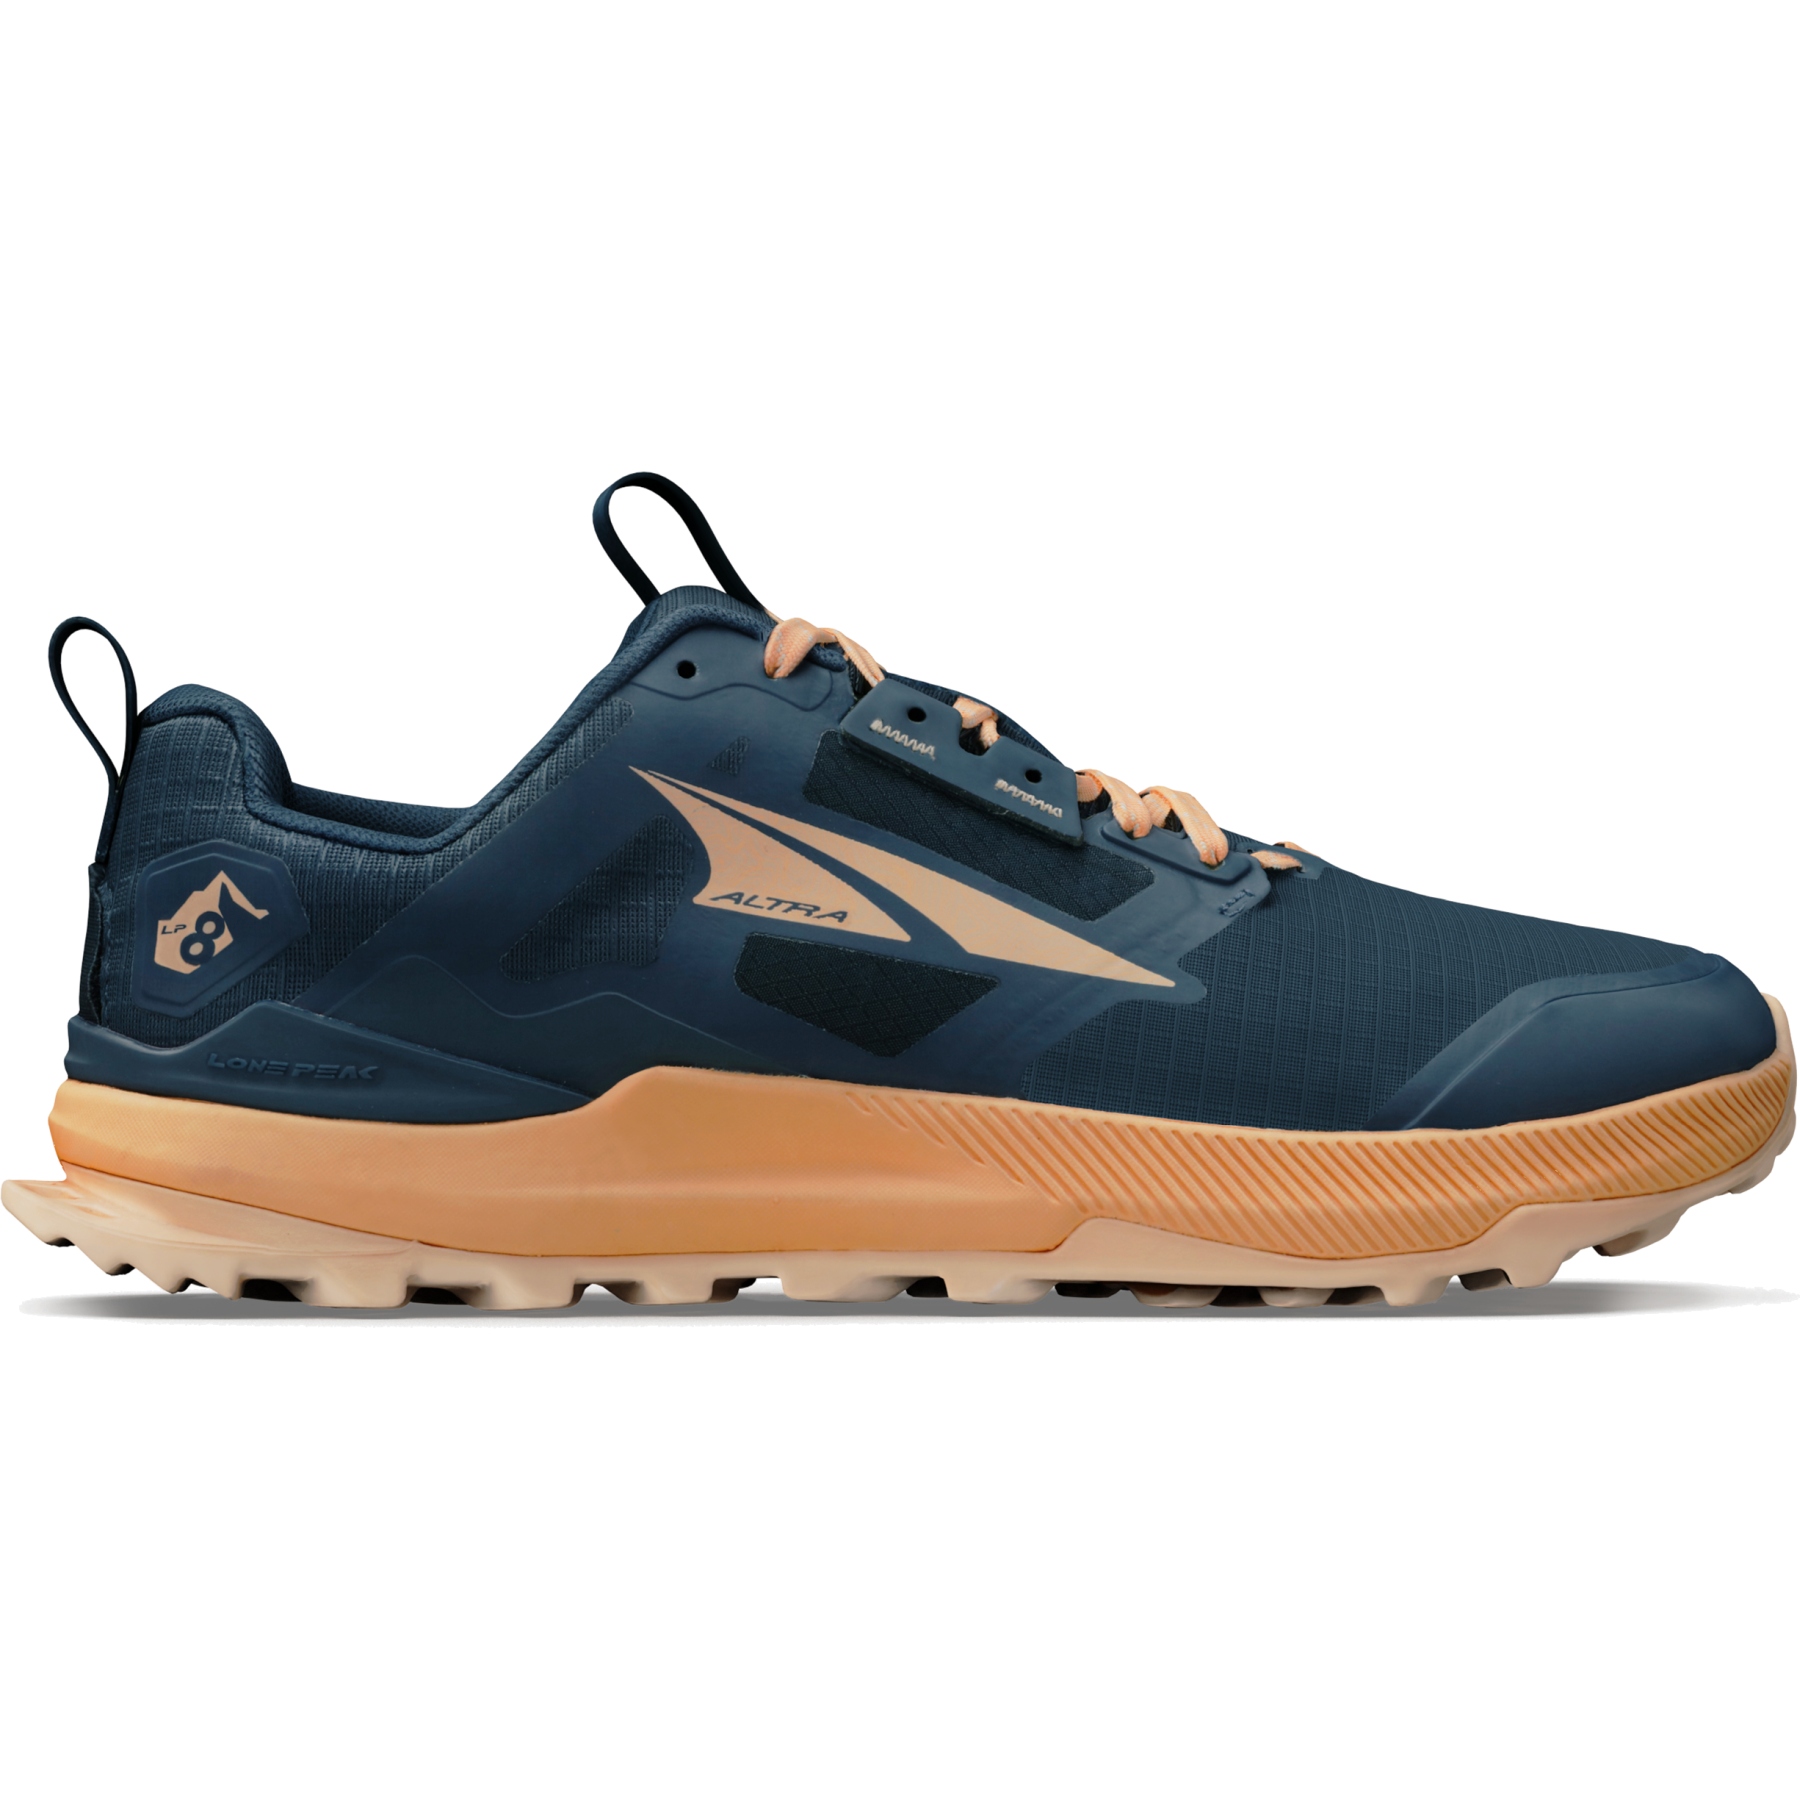 Picture of Altra Lone Peak 8 Trail Running Shoes Women - Navy/Coral